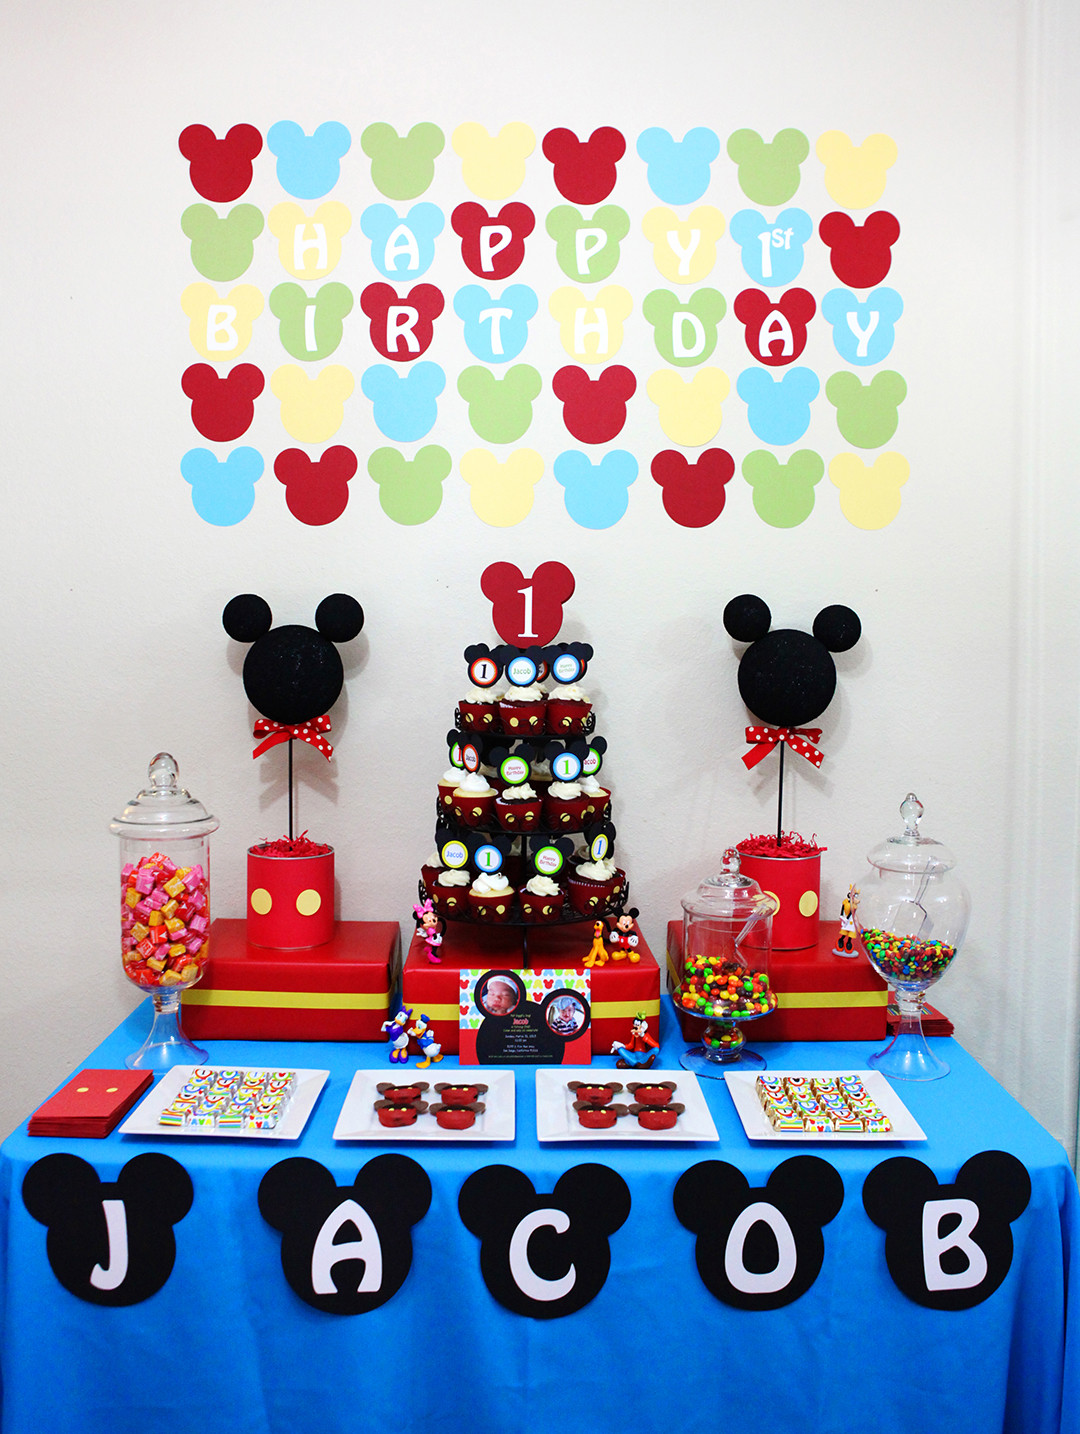 Mickey Mouse Birthday Party Supplies
 Invitation Parlour Mickey Mouse Birthday Party